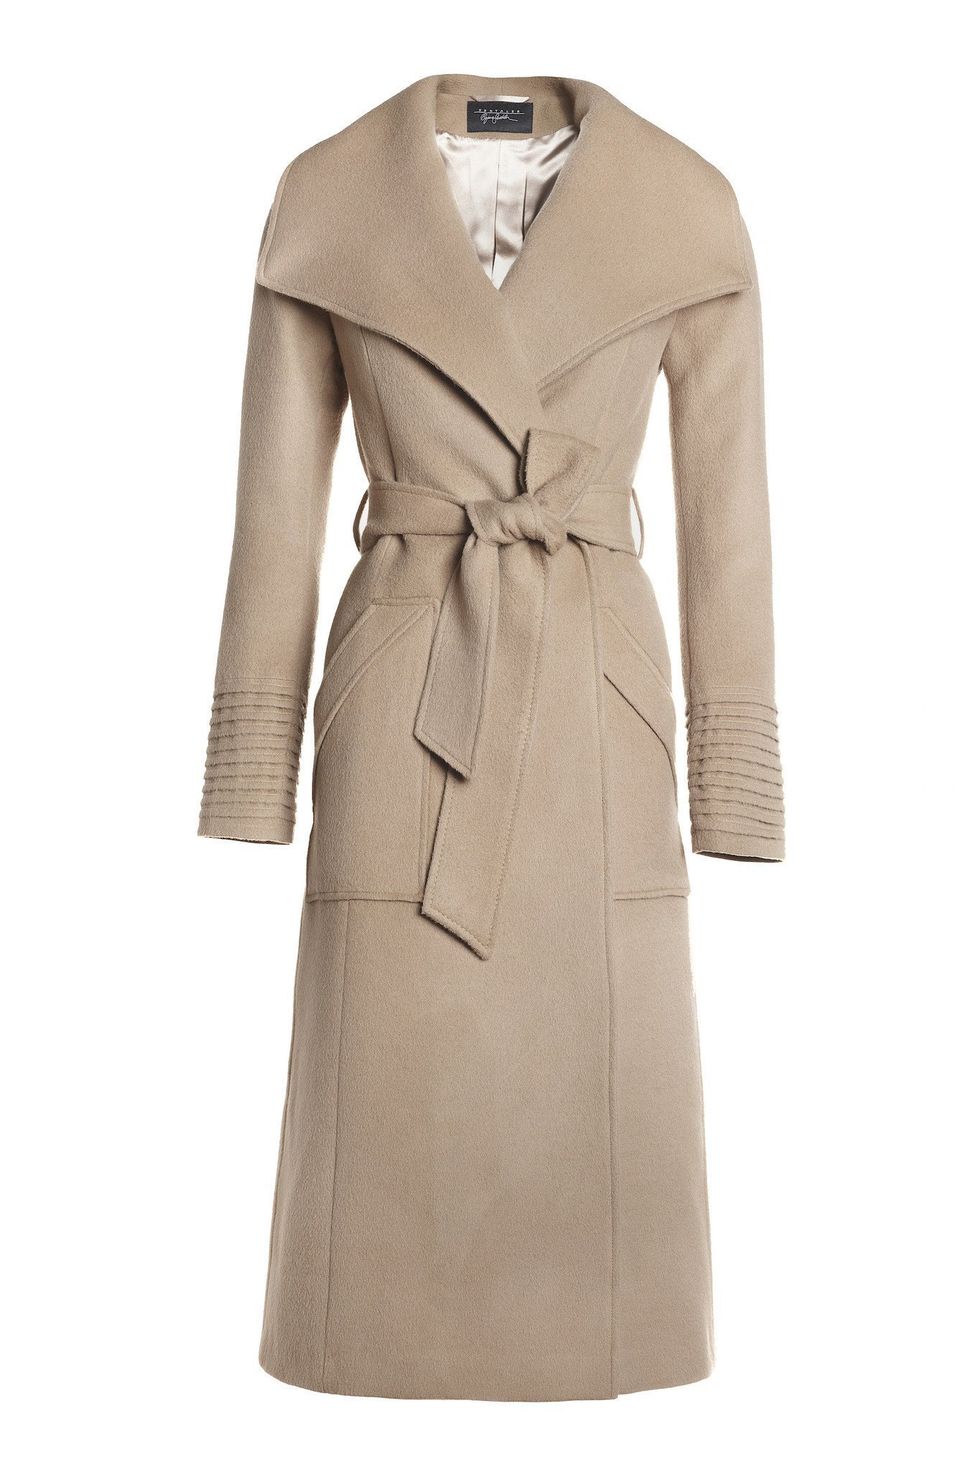 Clothing, Trench coat, Coat, Outerwear, Overcoat, Sleeve, Dress, Beige, Day dress, Collar, 